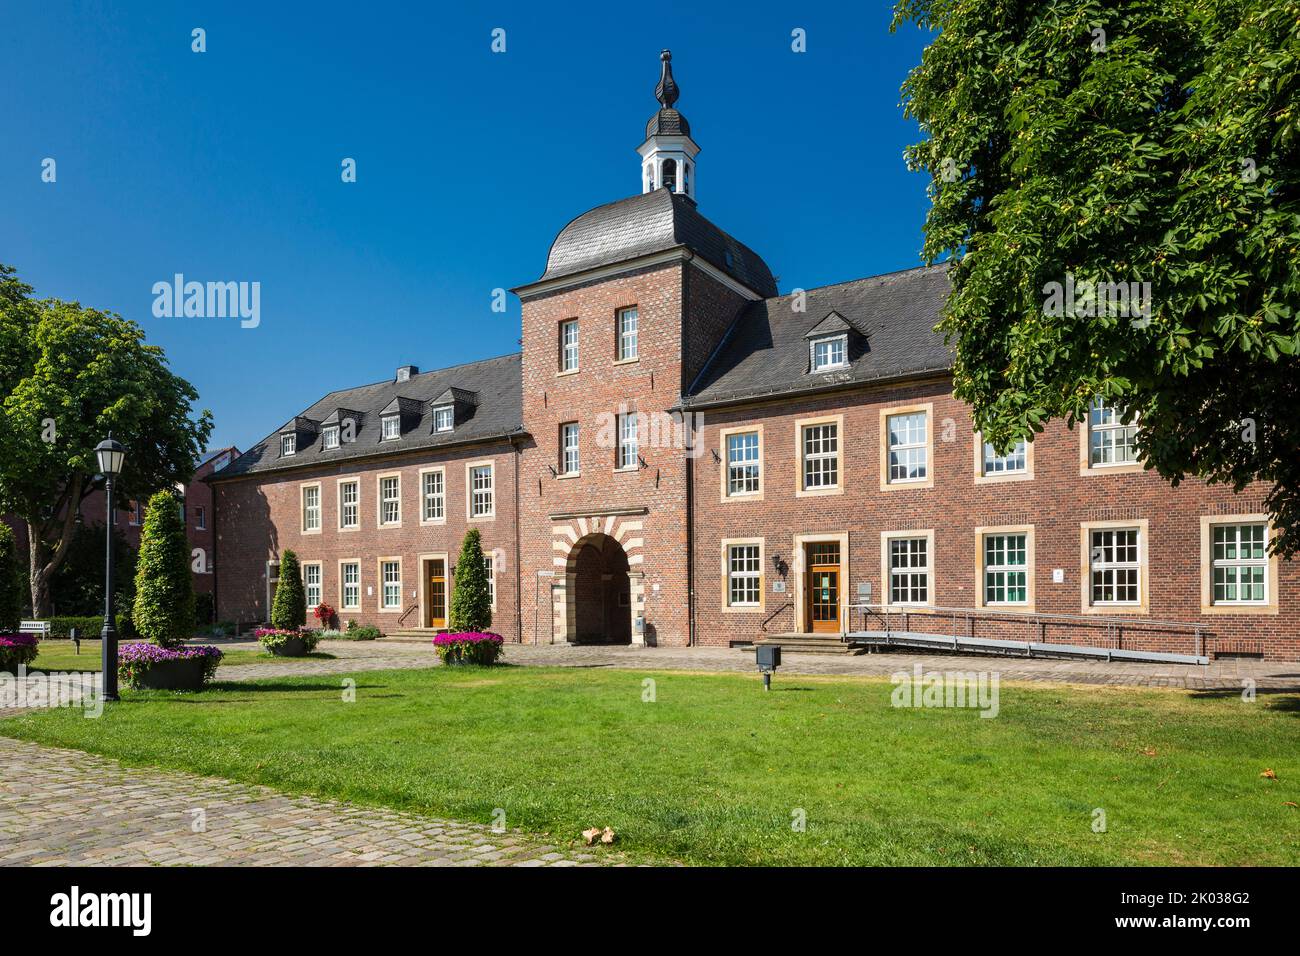 Germany, Ahaus, Westmuensterland, Muensterland, Westphalia, North Rhine-Westphalia, district court Ahaus at Suemmermannplatz in buildings of the outer castle of Ahaus Castle, main building Stock Photo